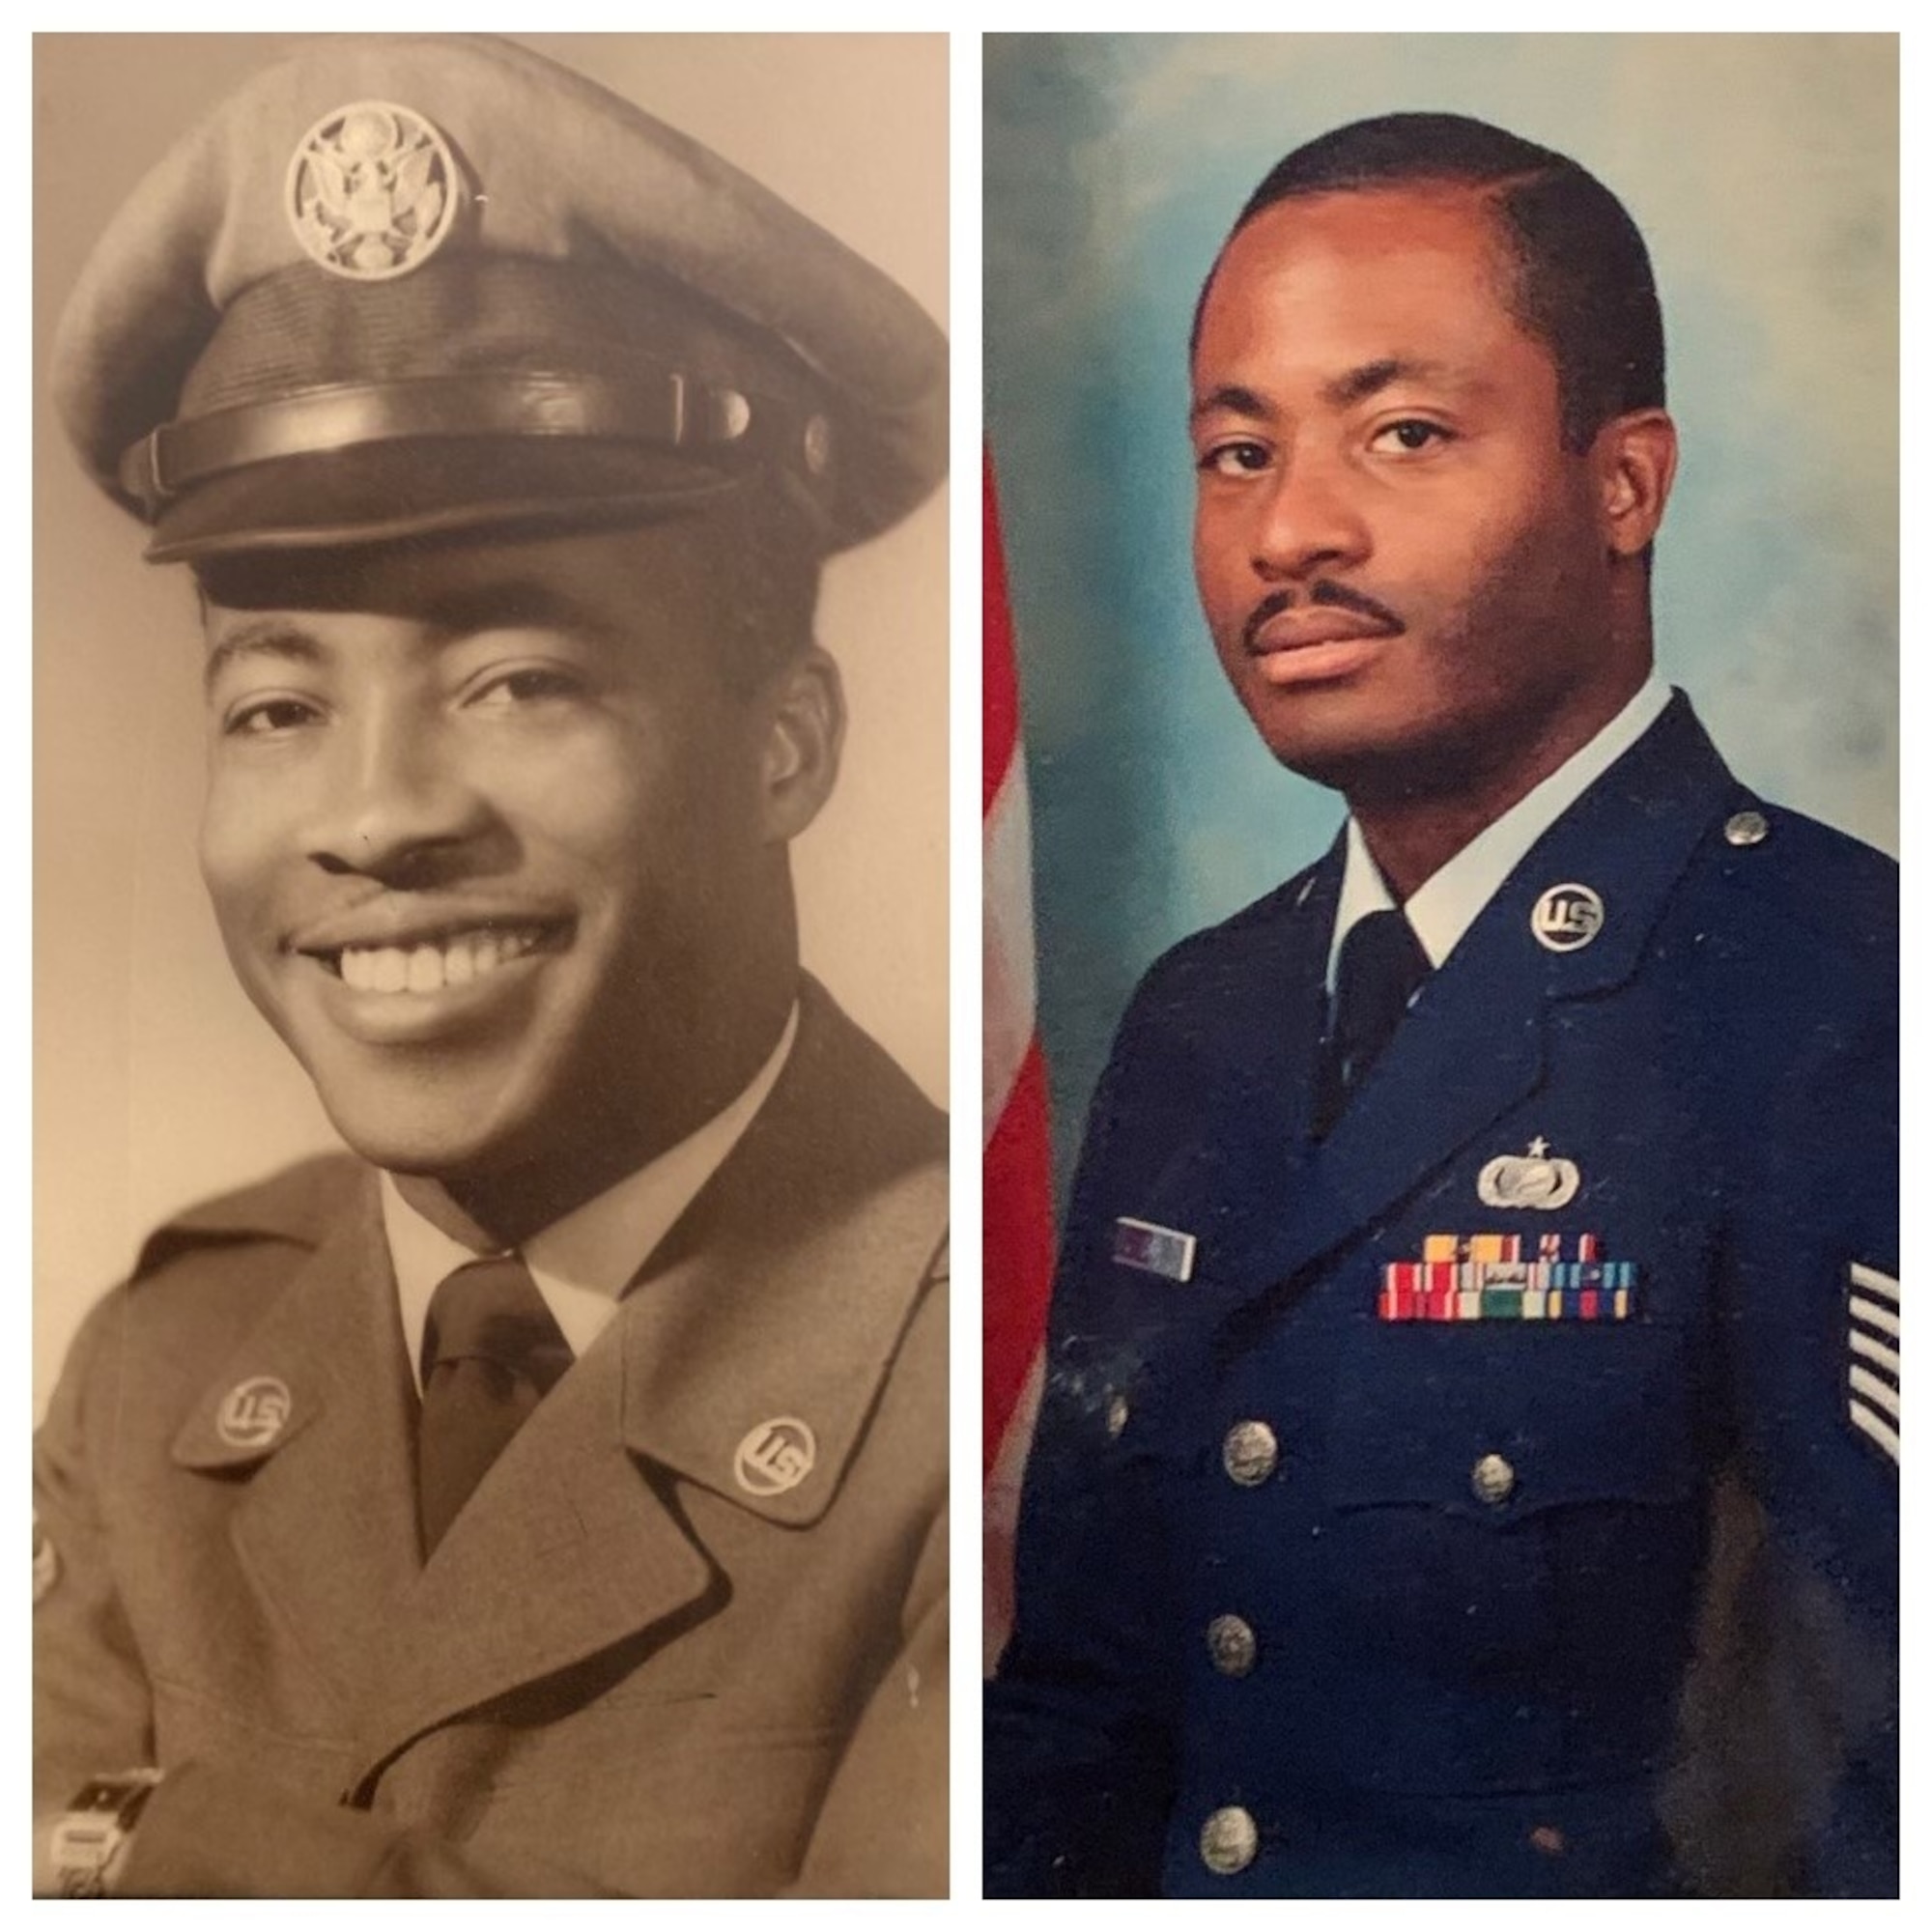 The name Howard Cary has been synonymous with selfless Air Force service for two generations, spanning more than 60 years. Howard Cary Sr., left,
and his son Howard Cary Jr., an Office of Special Investigations administrator, right, have made the Air Force a true family affair. (Courtesy photo)